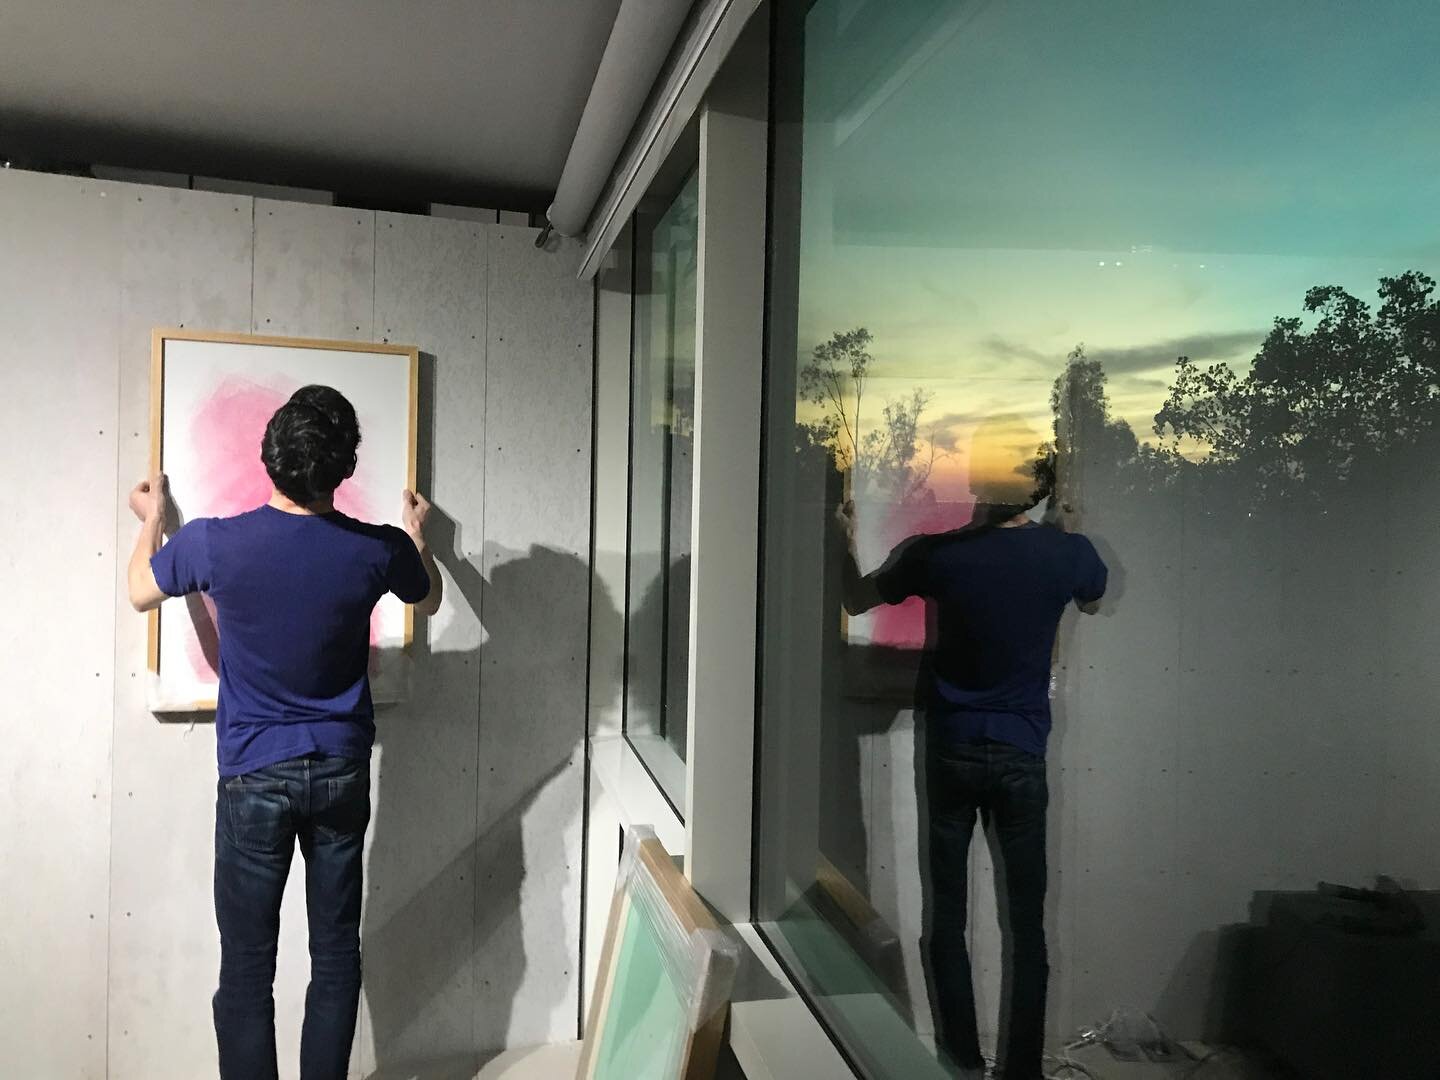 throwback to 2018, installation of Progress my first solo exhibition